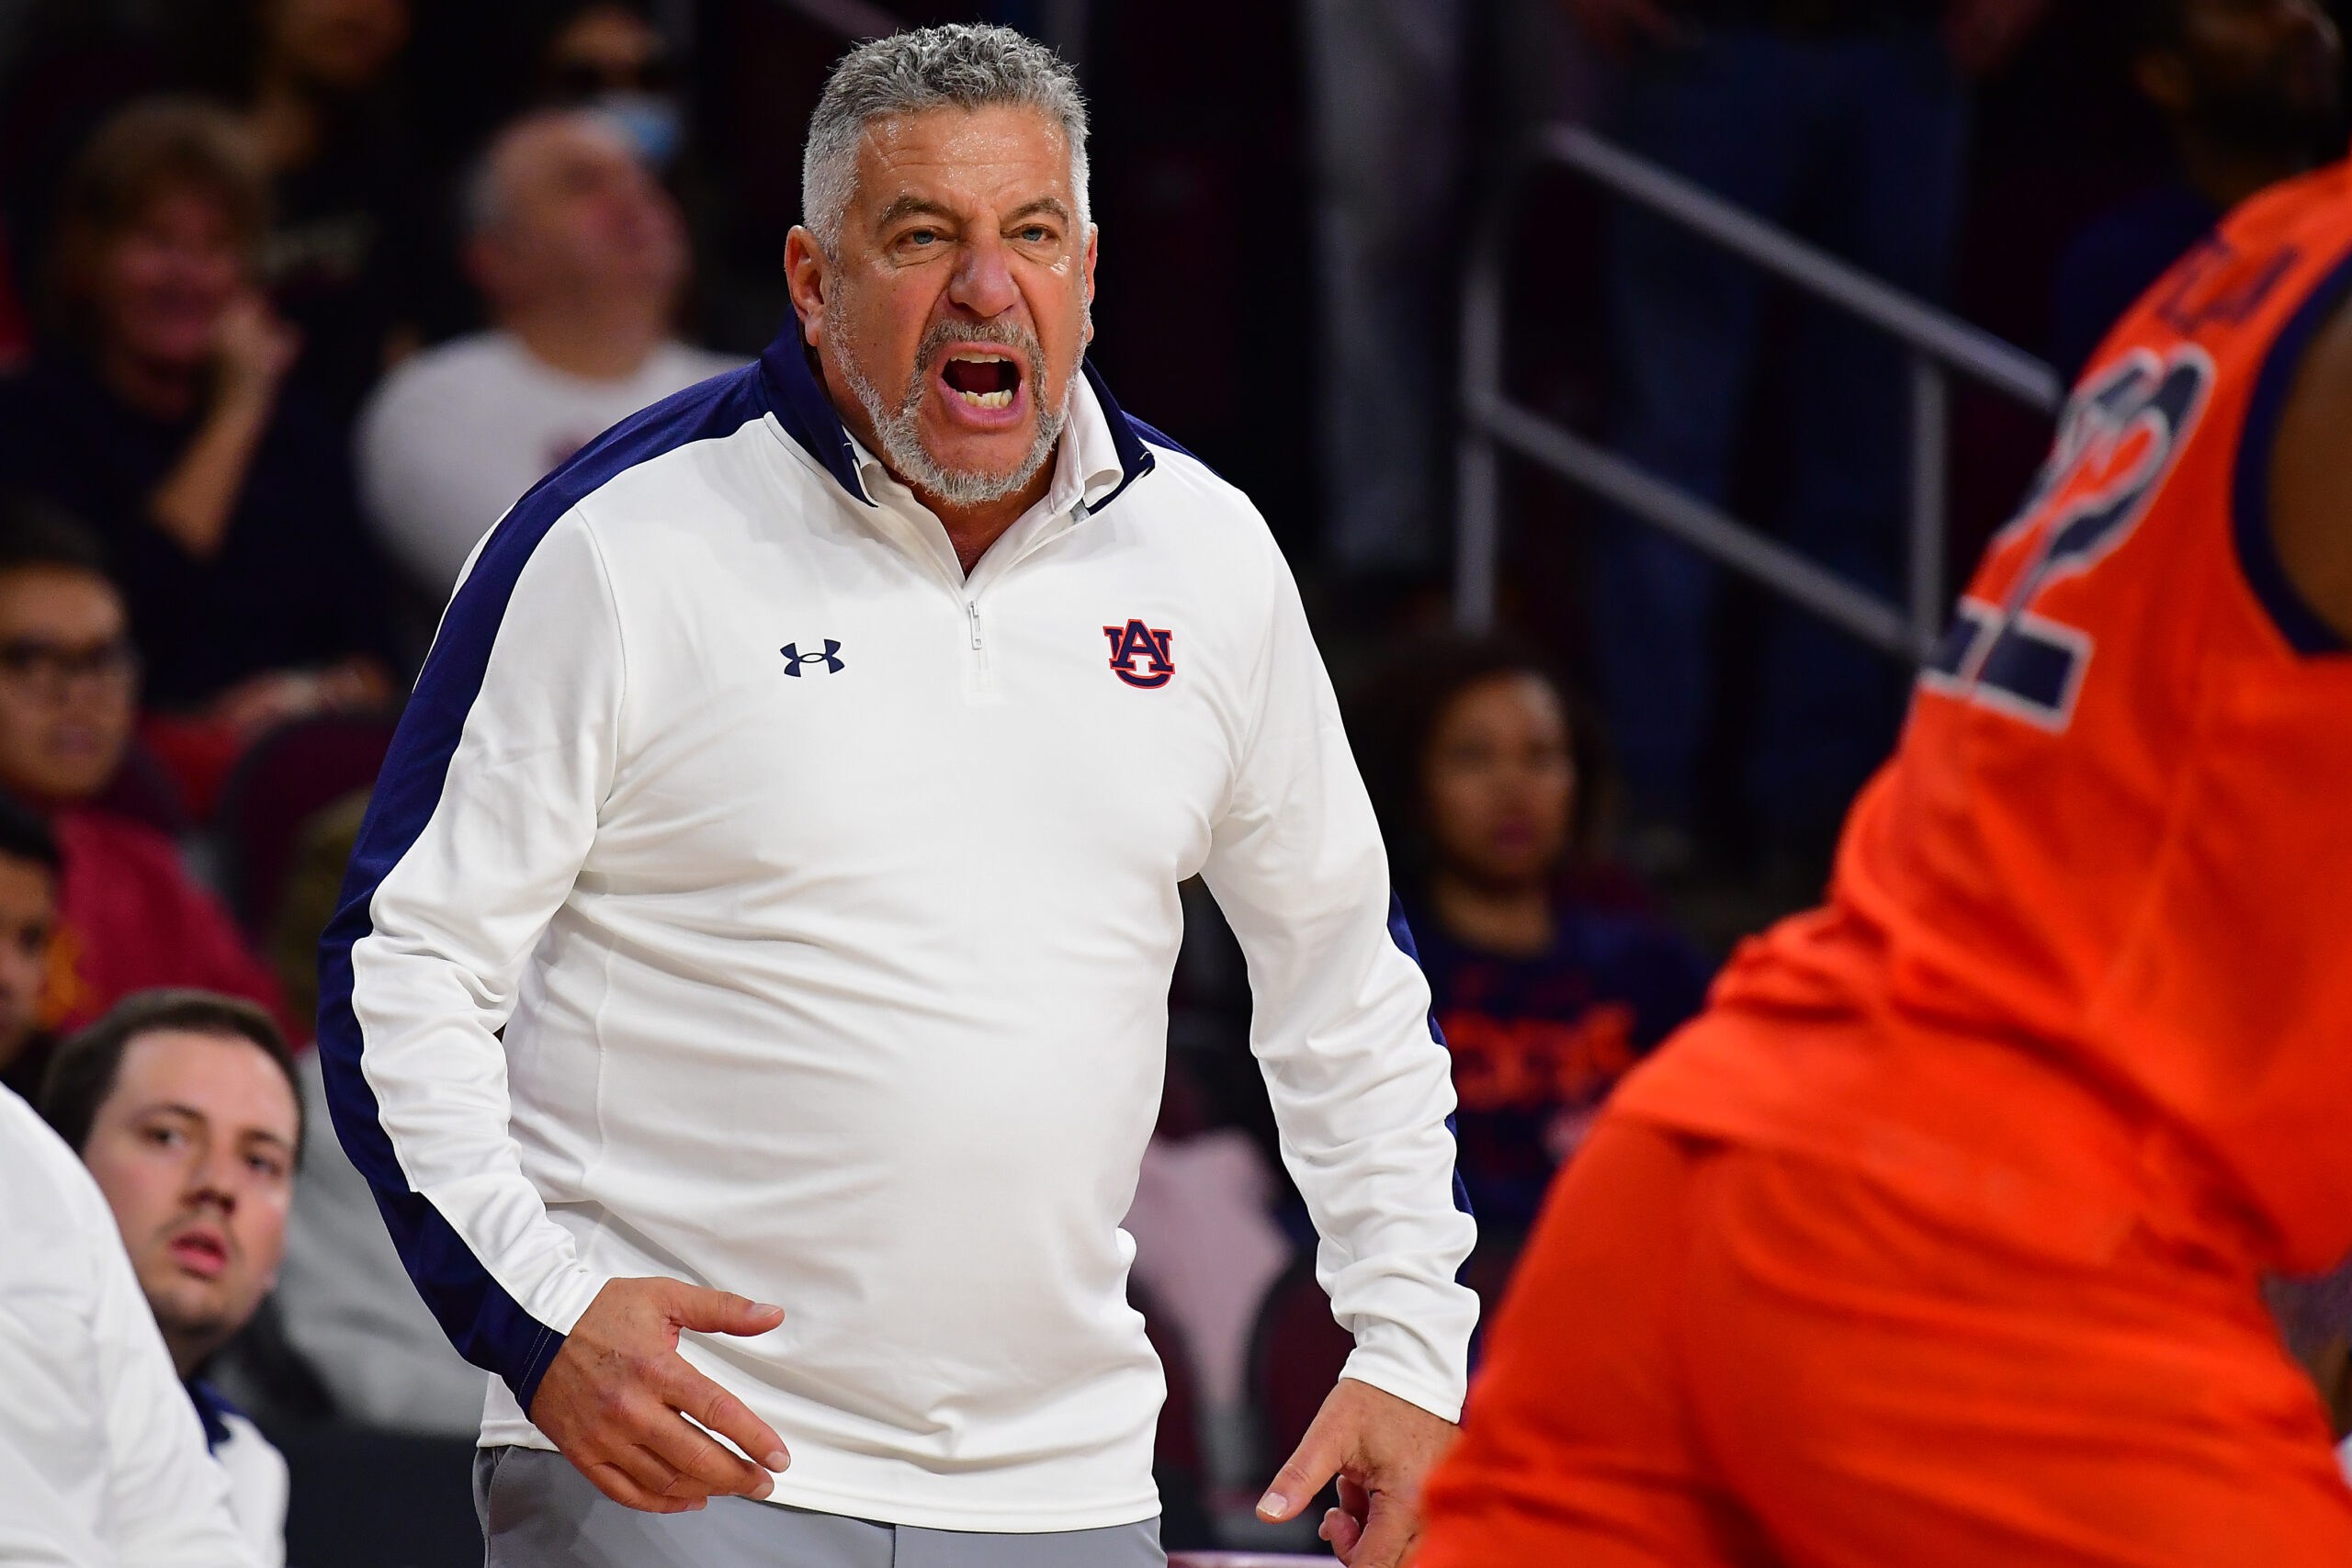 Bruce Pearl on the hot seat? One site makes appalling claim